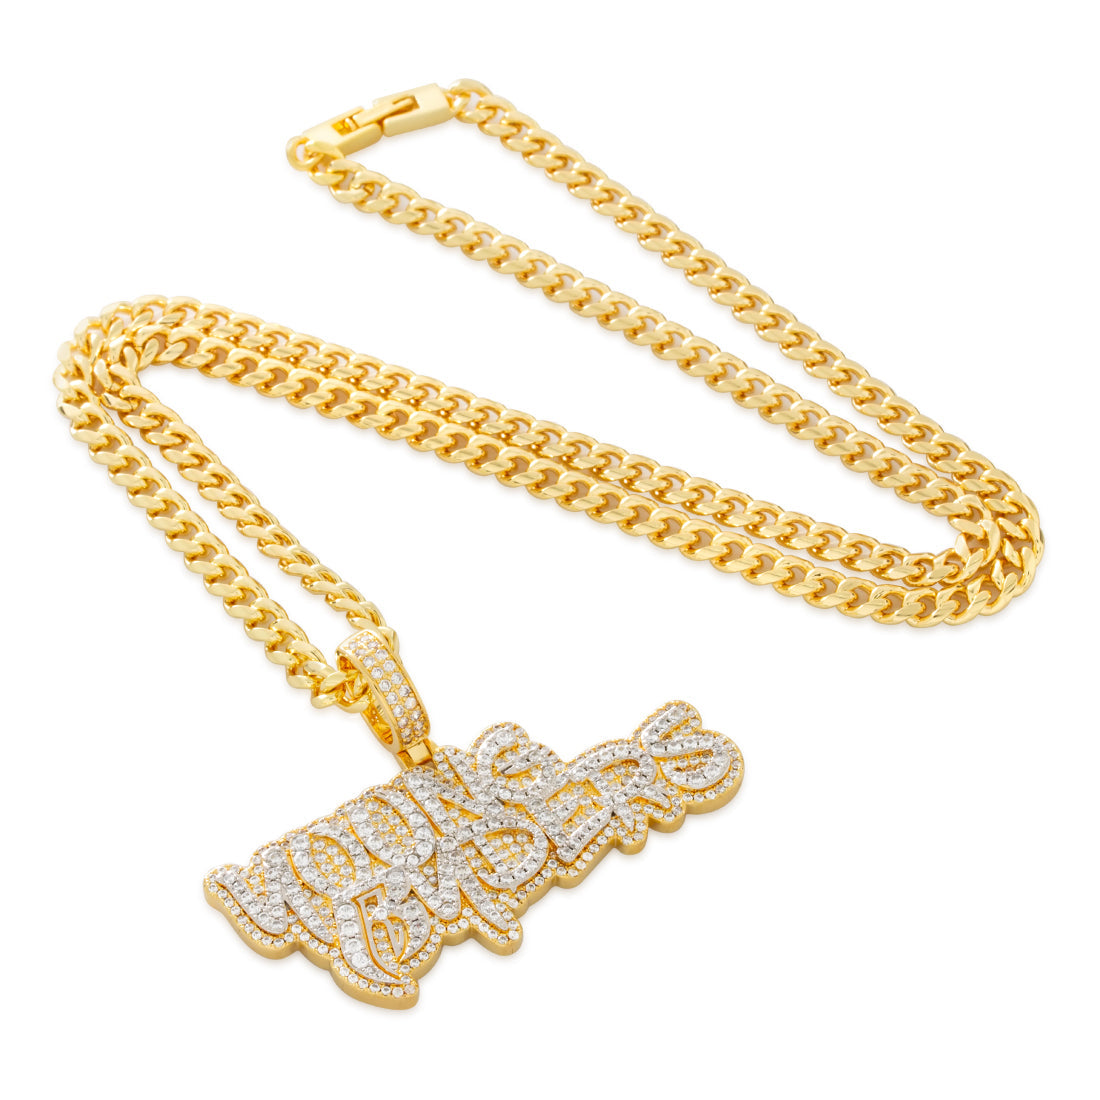 Ruff Ryders x King ice - Young Ryders Necklace